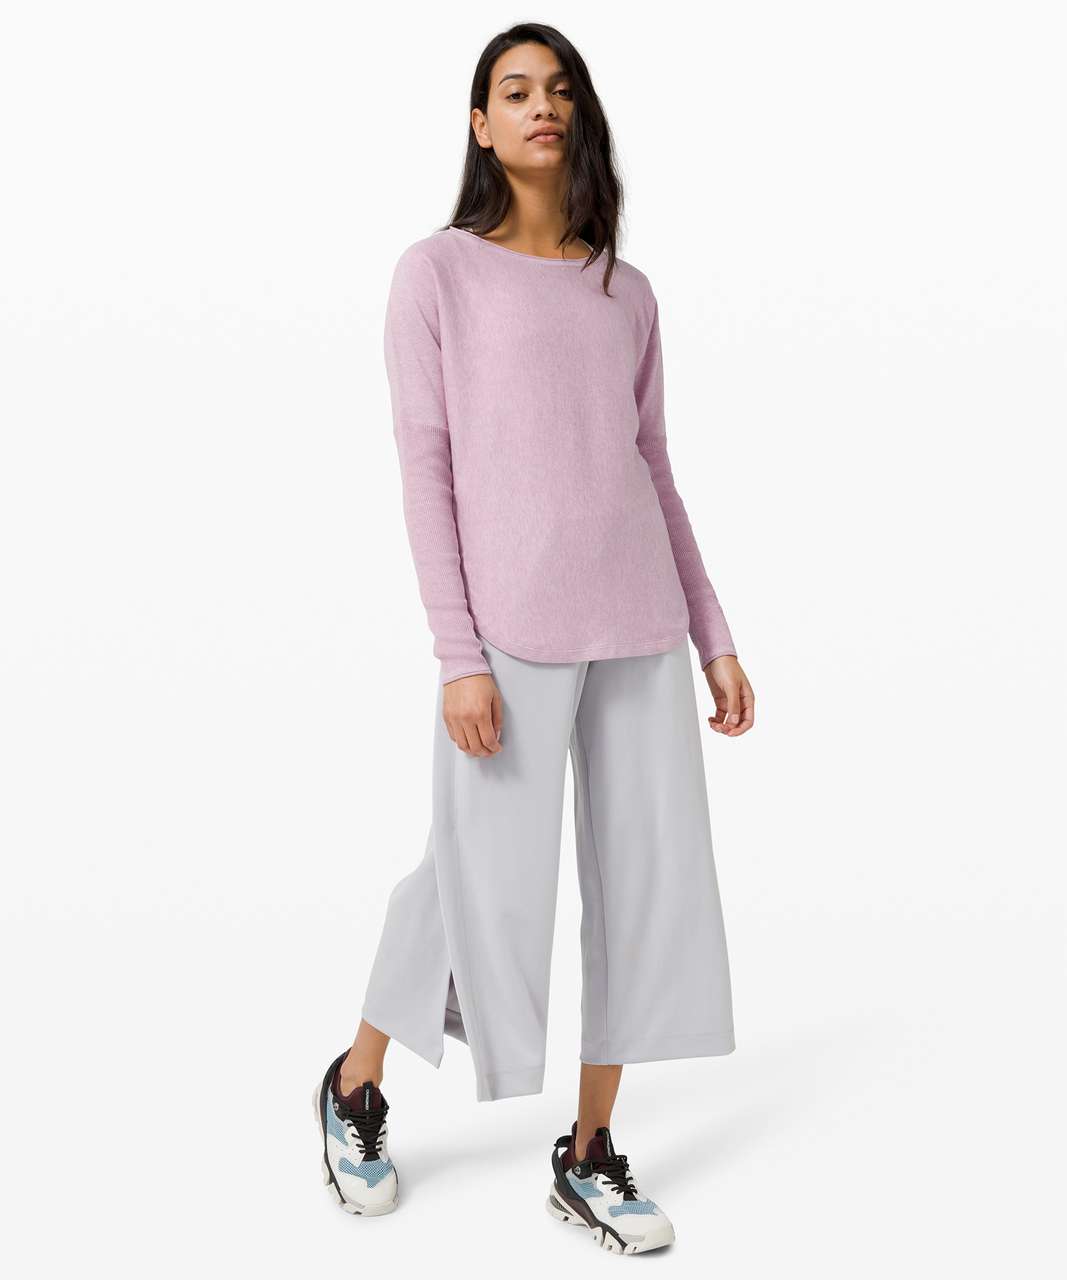 Lululemon Take it All In Sweater - Heathered Pink Taupe